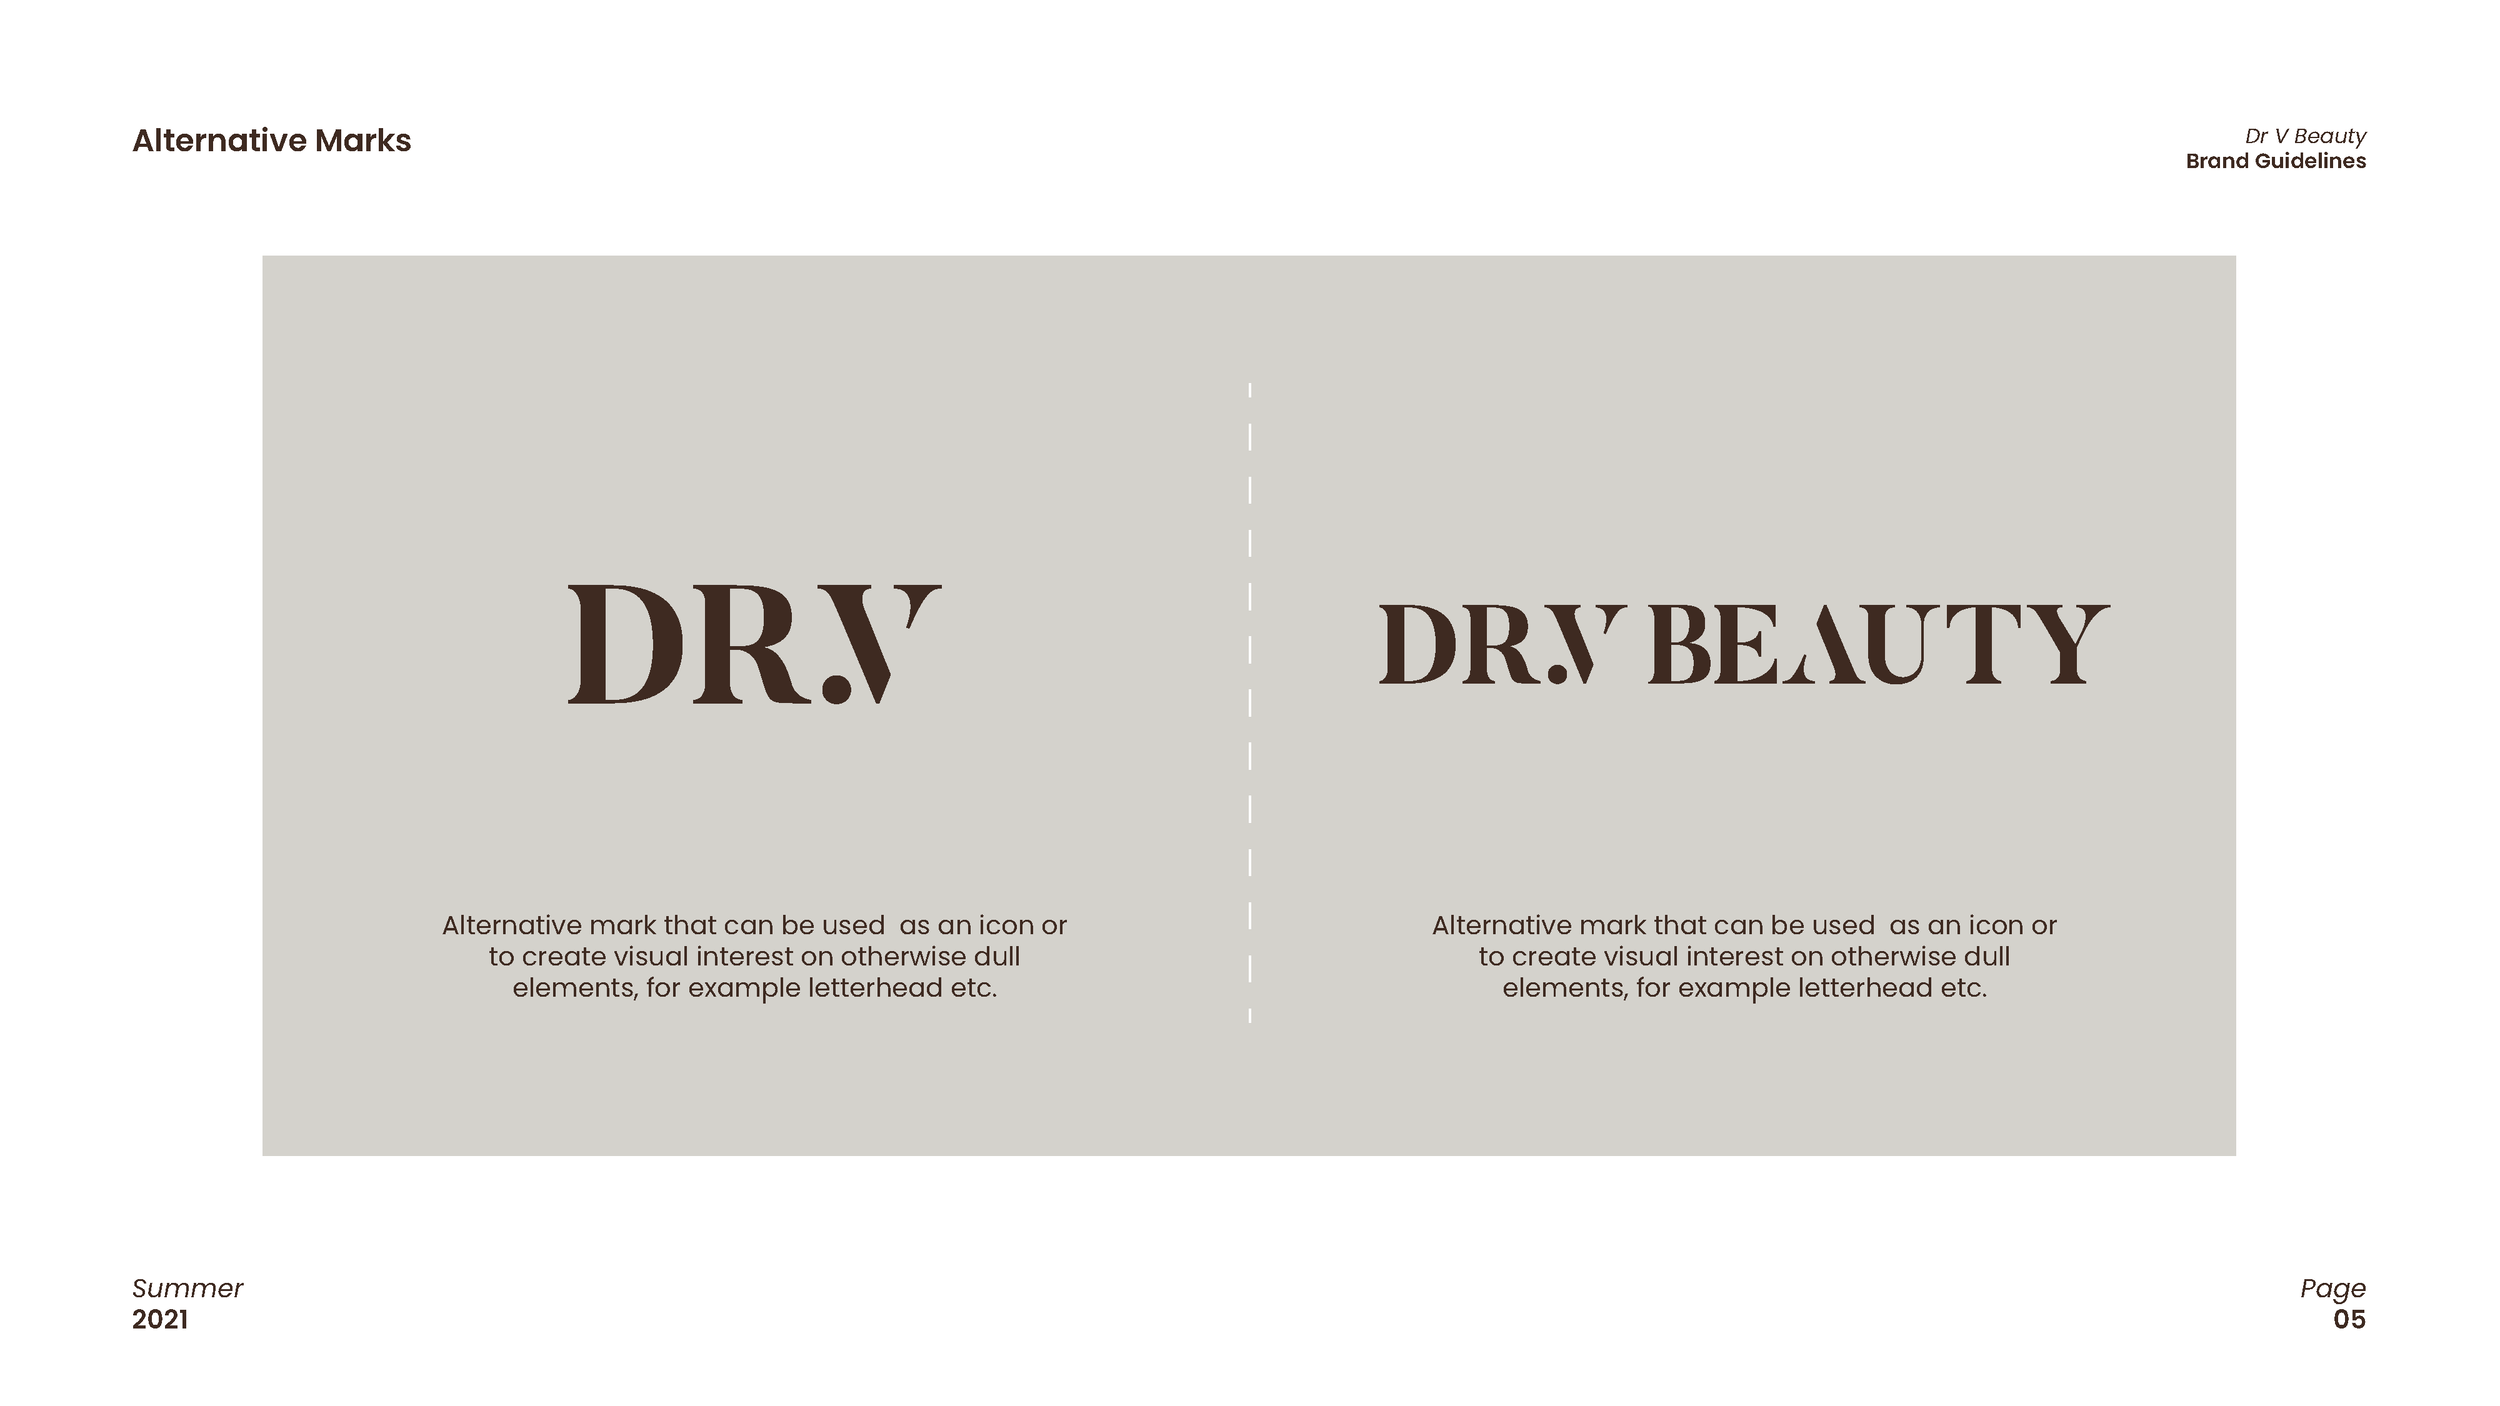 Dr V Beauty - Brand Guidelines_Page_05.png